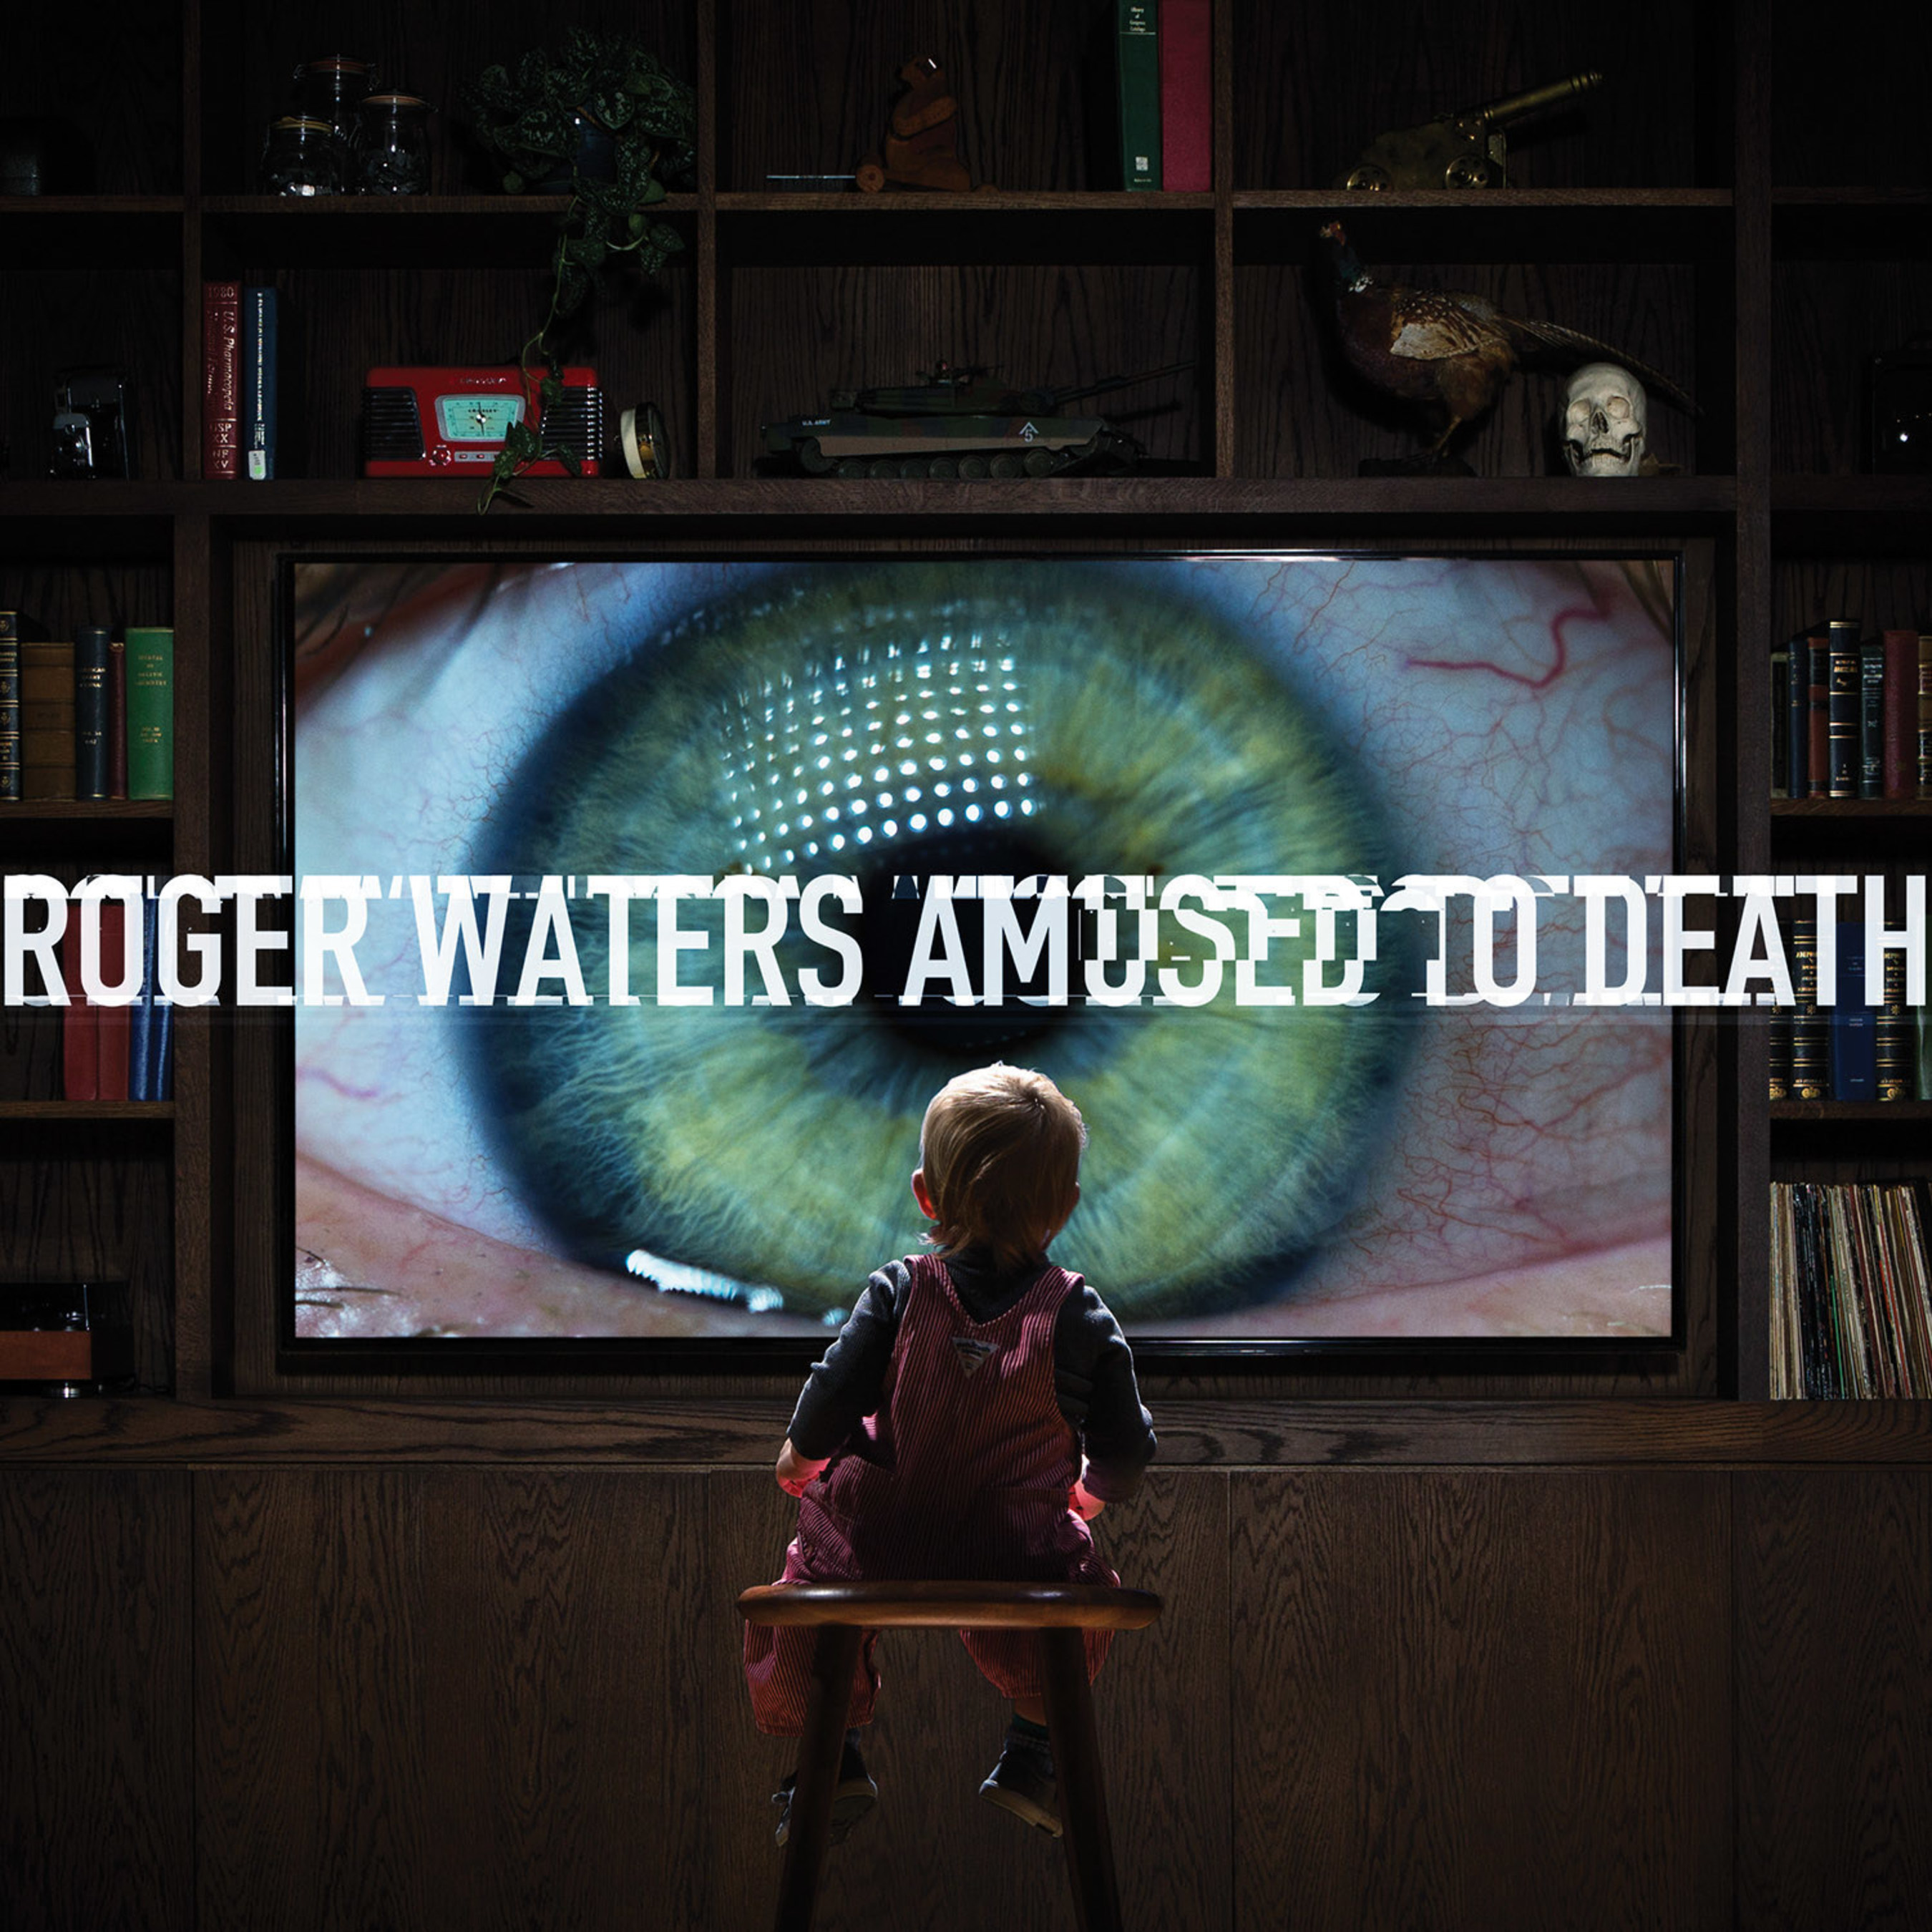 Roger Waters' album AMUSED TO DEATH returns in a remastered release from Columbia Records / Legacy Recordings on July 24th